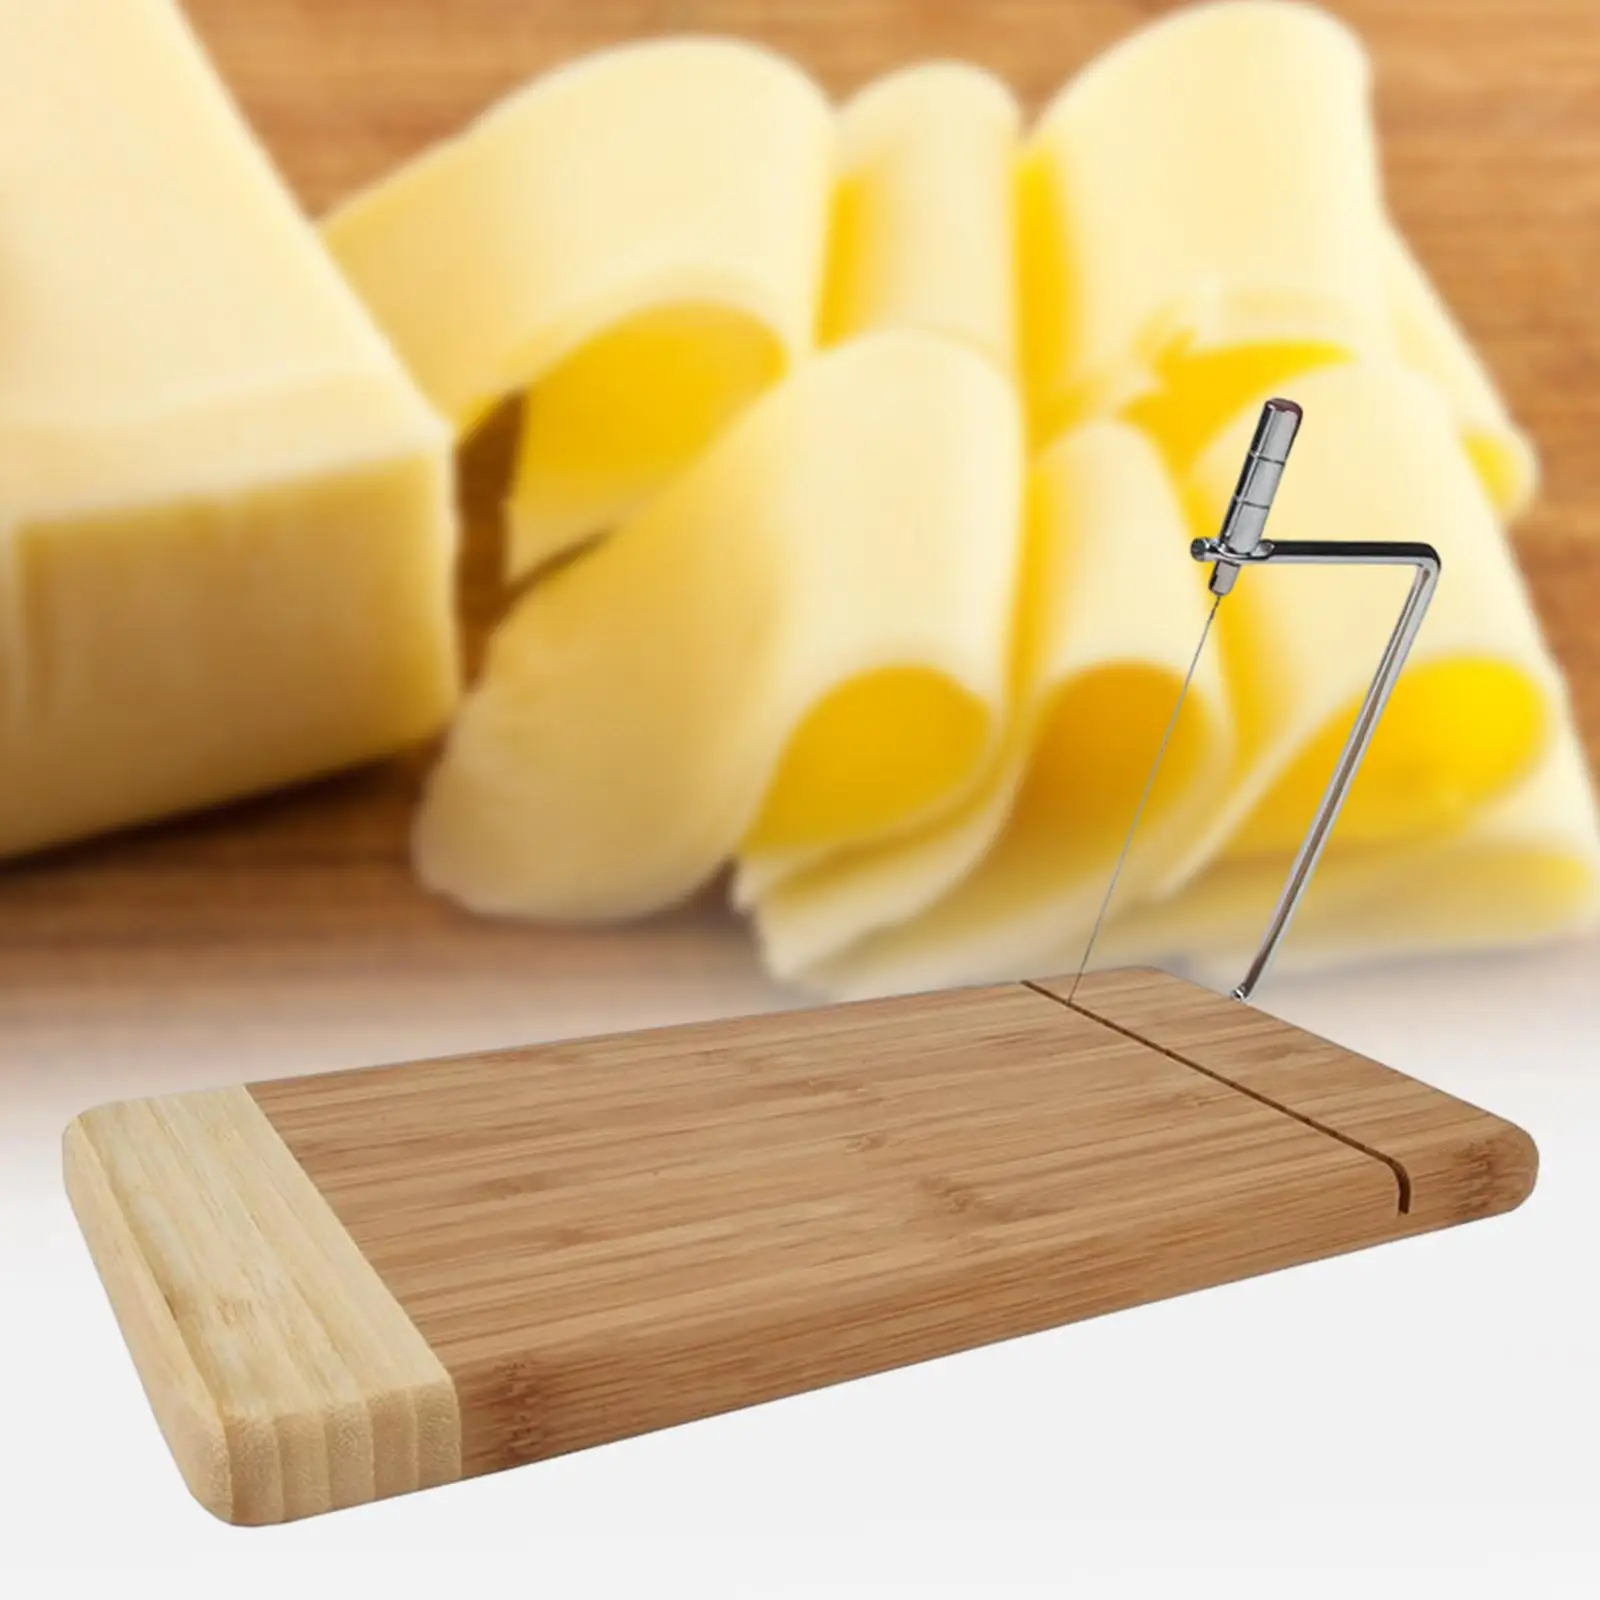 Wood Serving Board with Cheese Slicer Baking Accessories Cheese Cutter for Fruits Handcrafted Soaps Tofu Block Cheese Butter